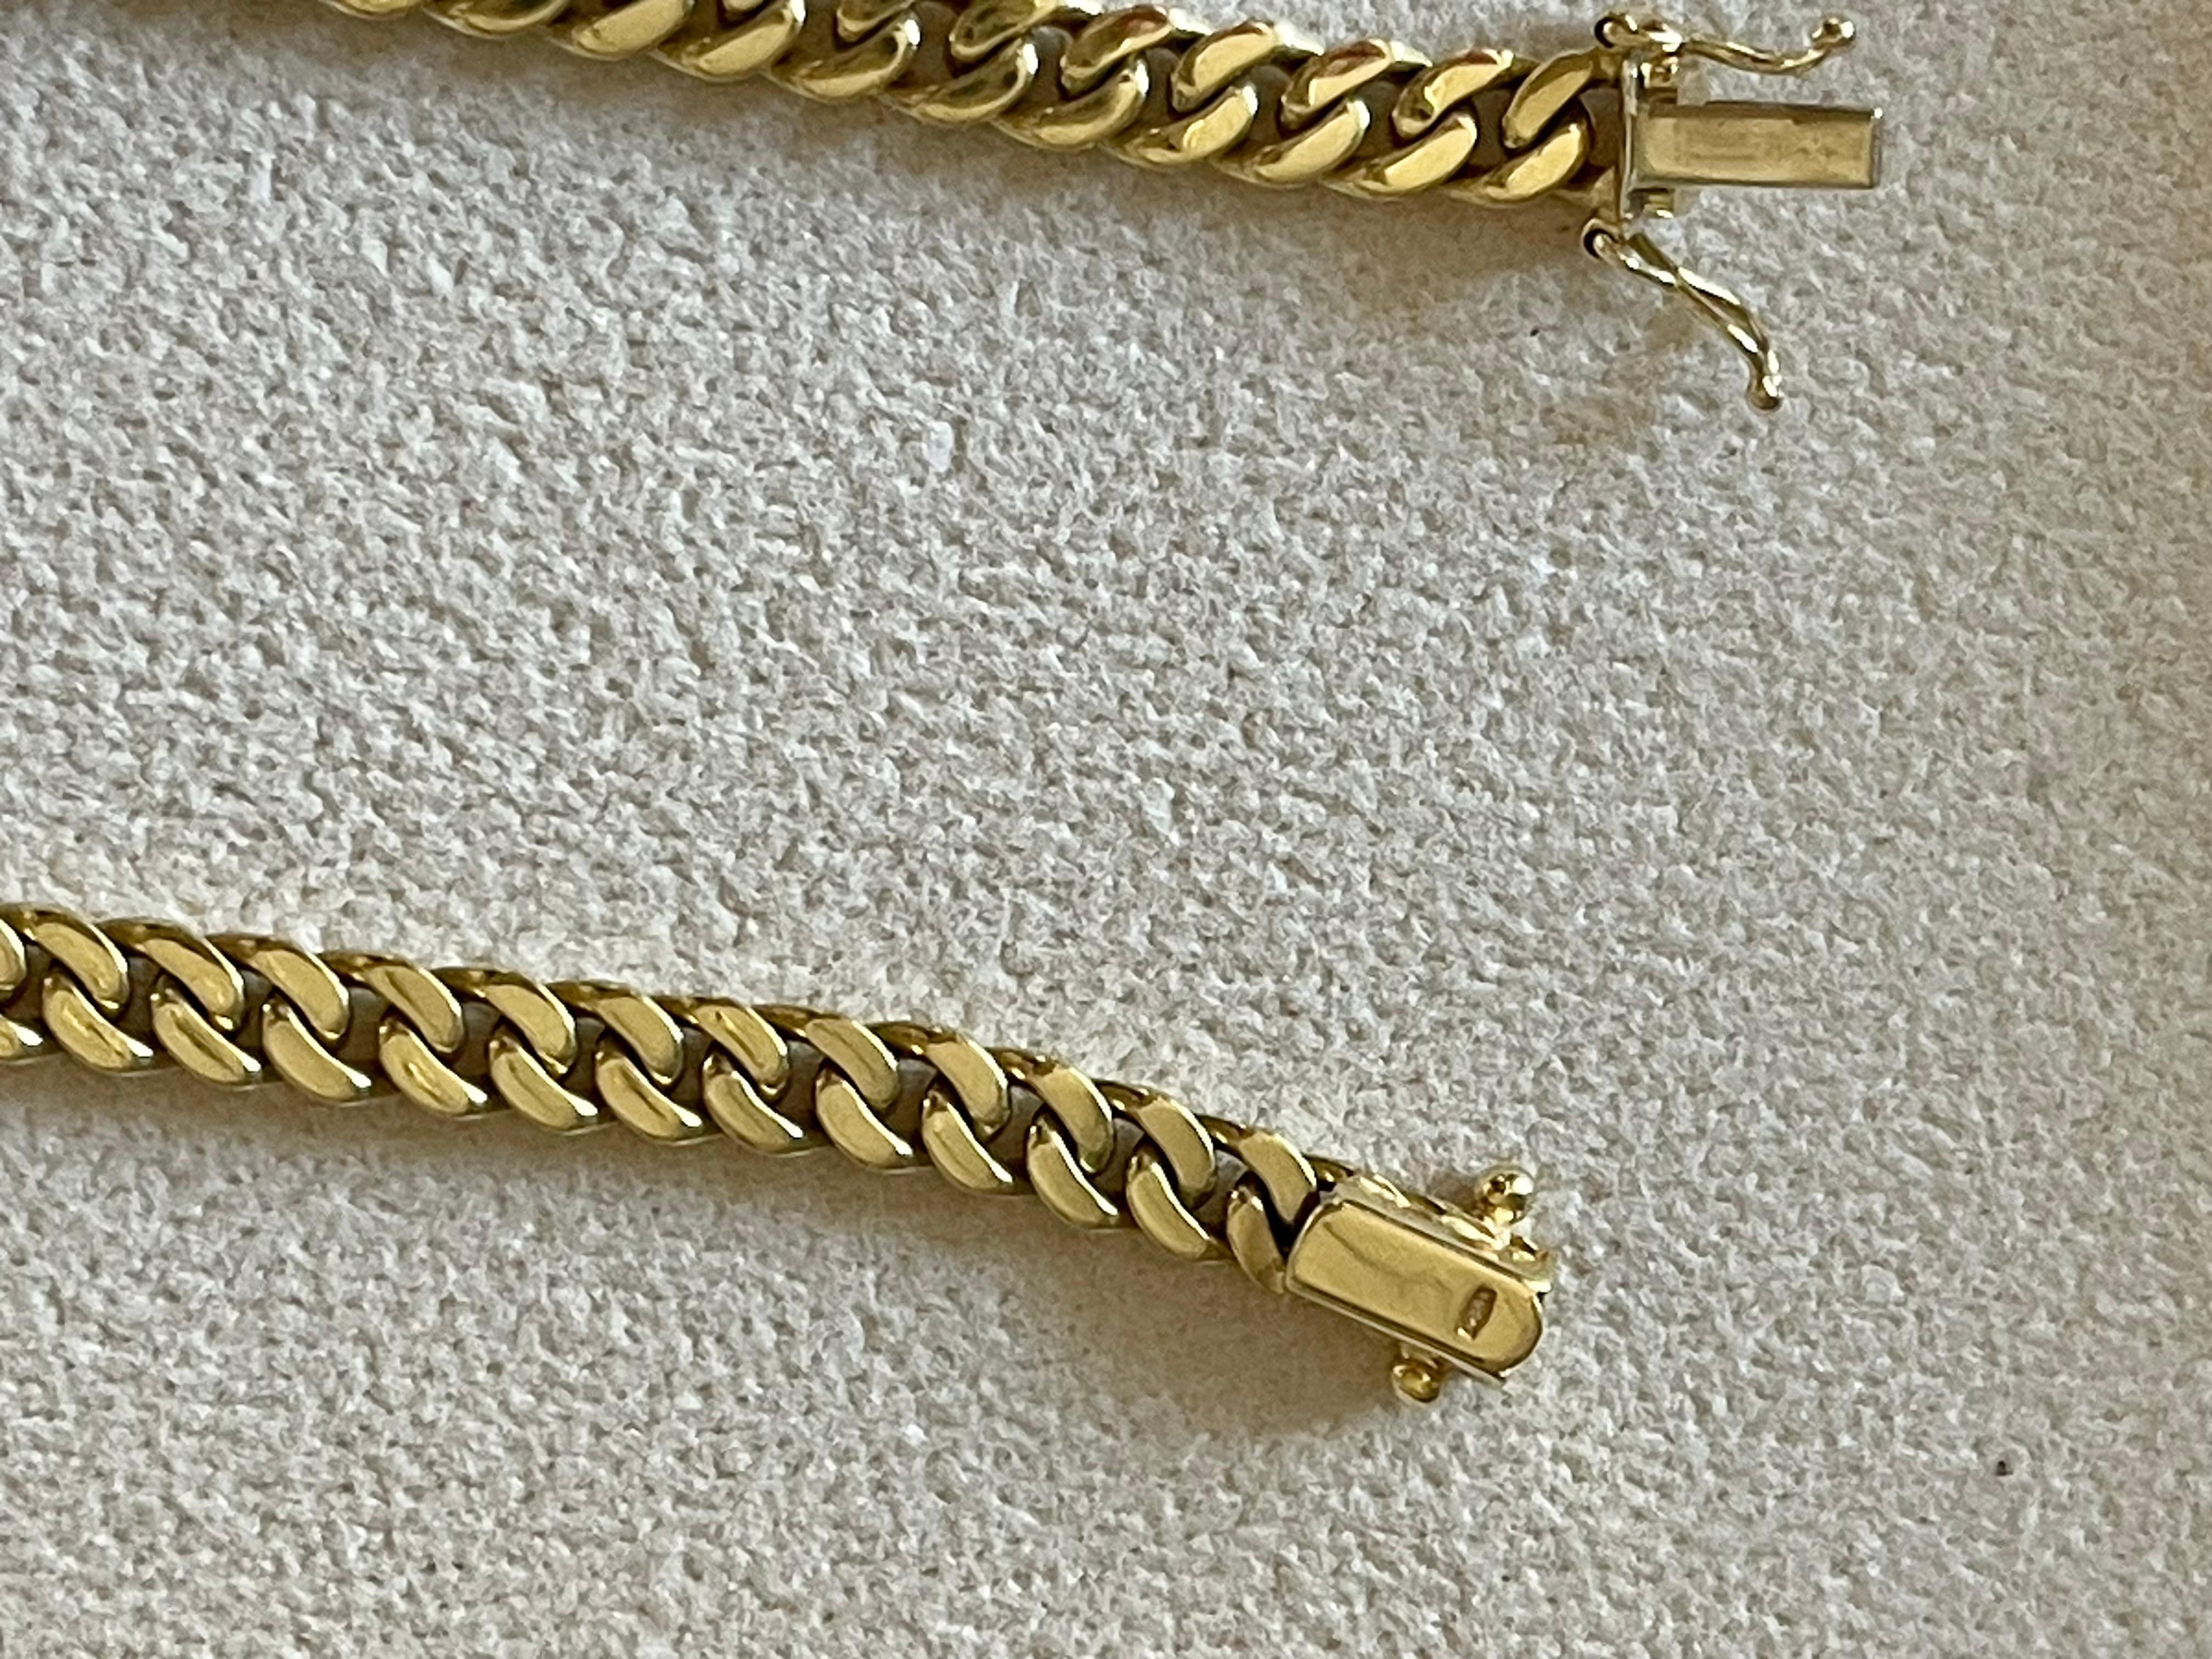 rolex chain with heart pendant